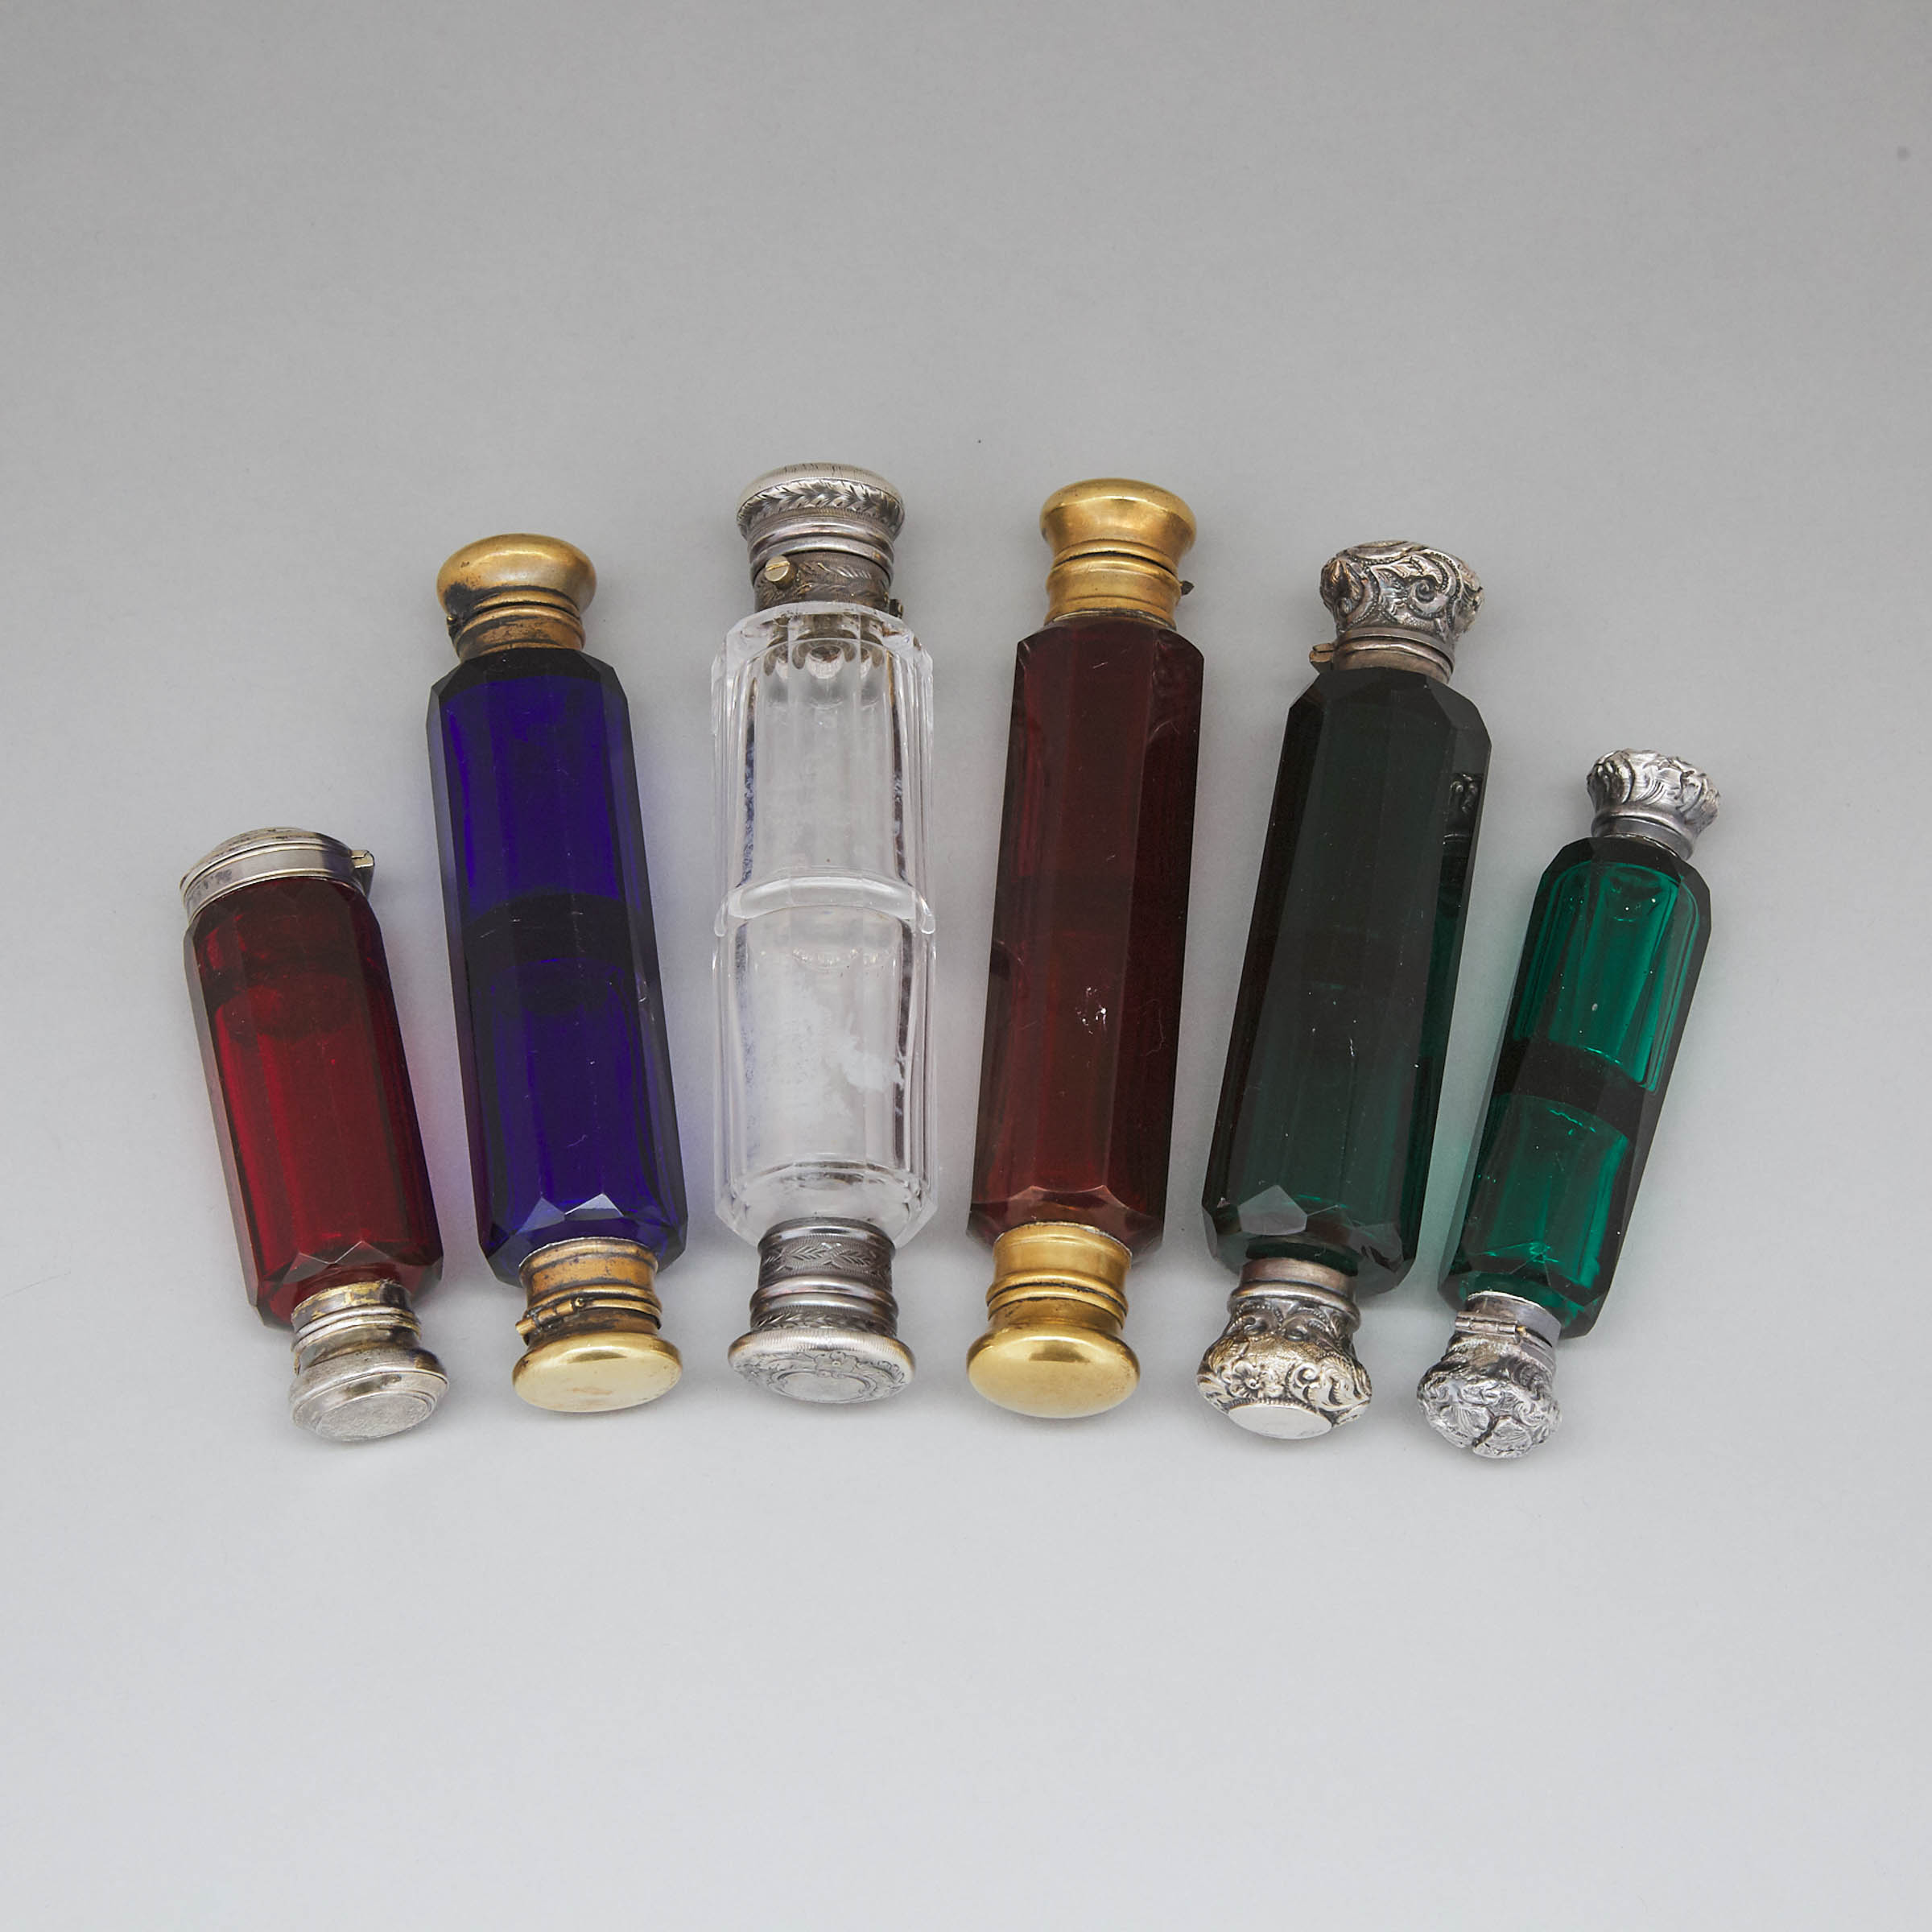 Six Silver and Metal Mounted Red, Green, Blue and Clear Cut Glass Double-Ended Perfume Phials, late 19th century